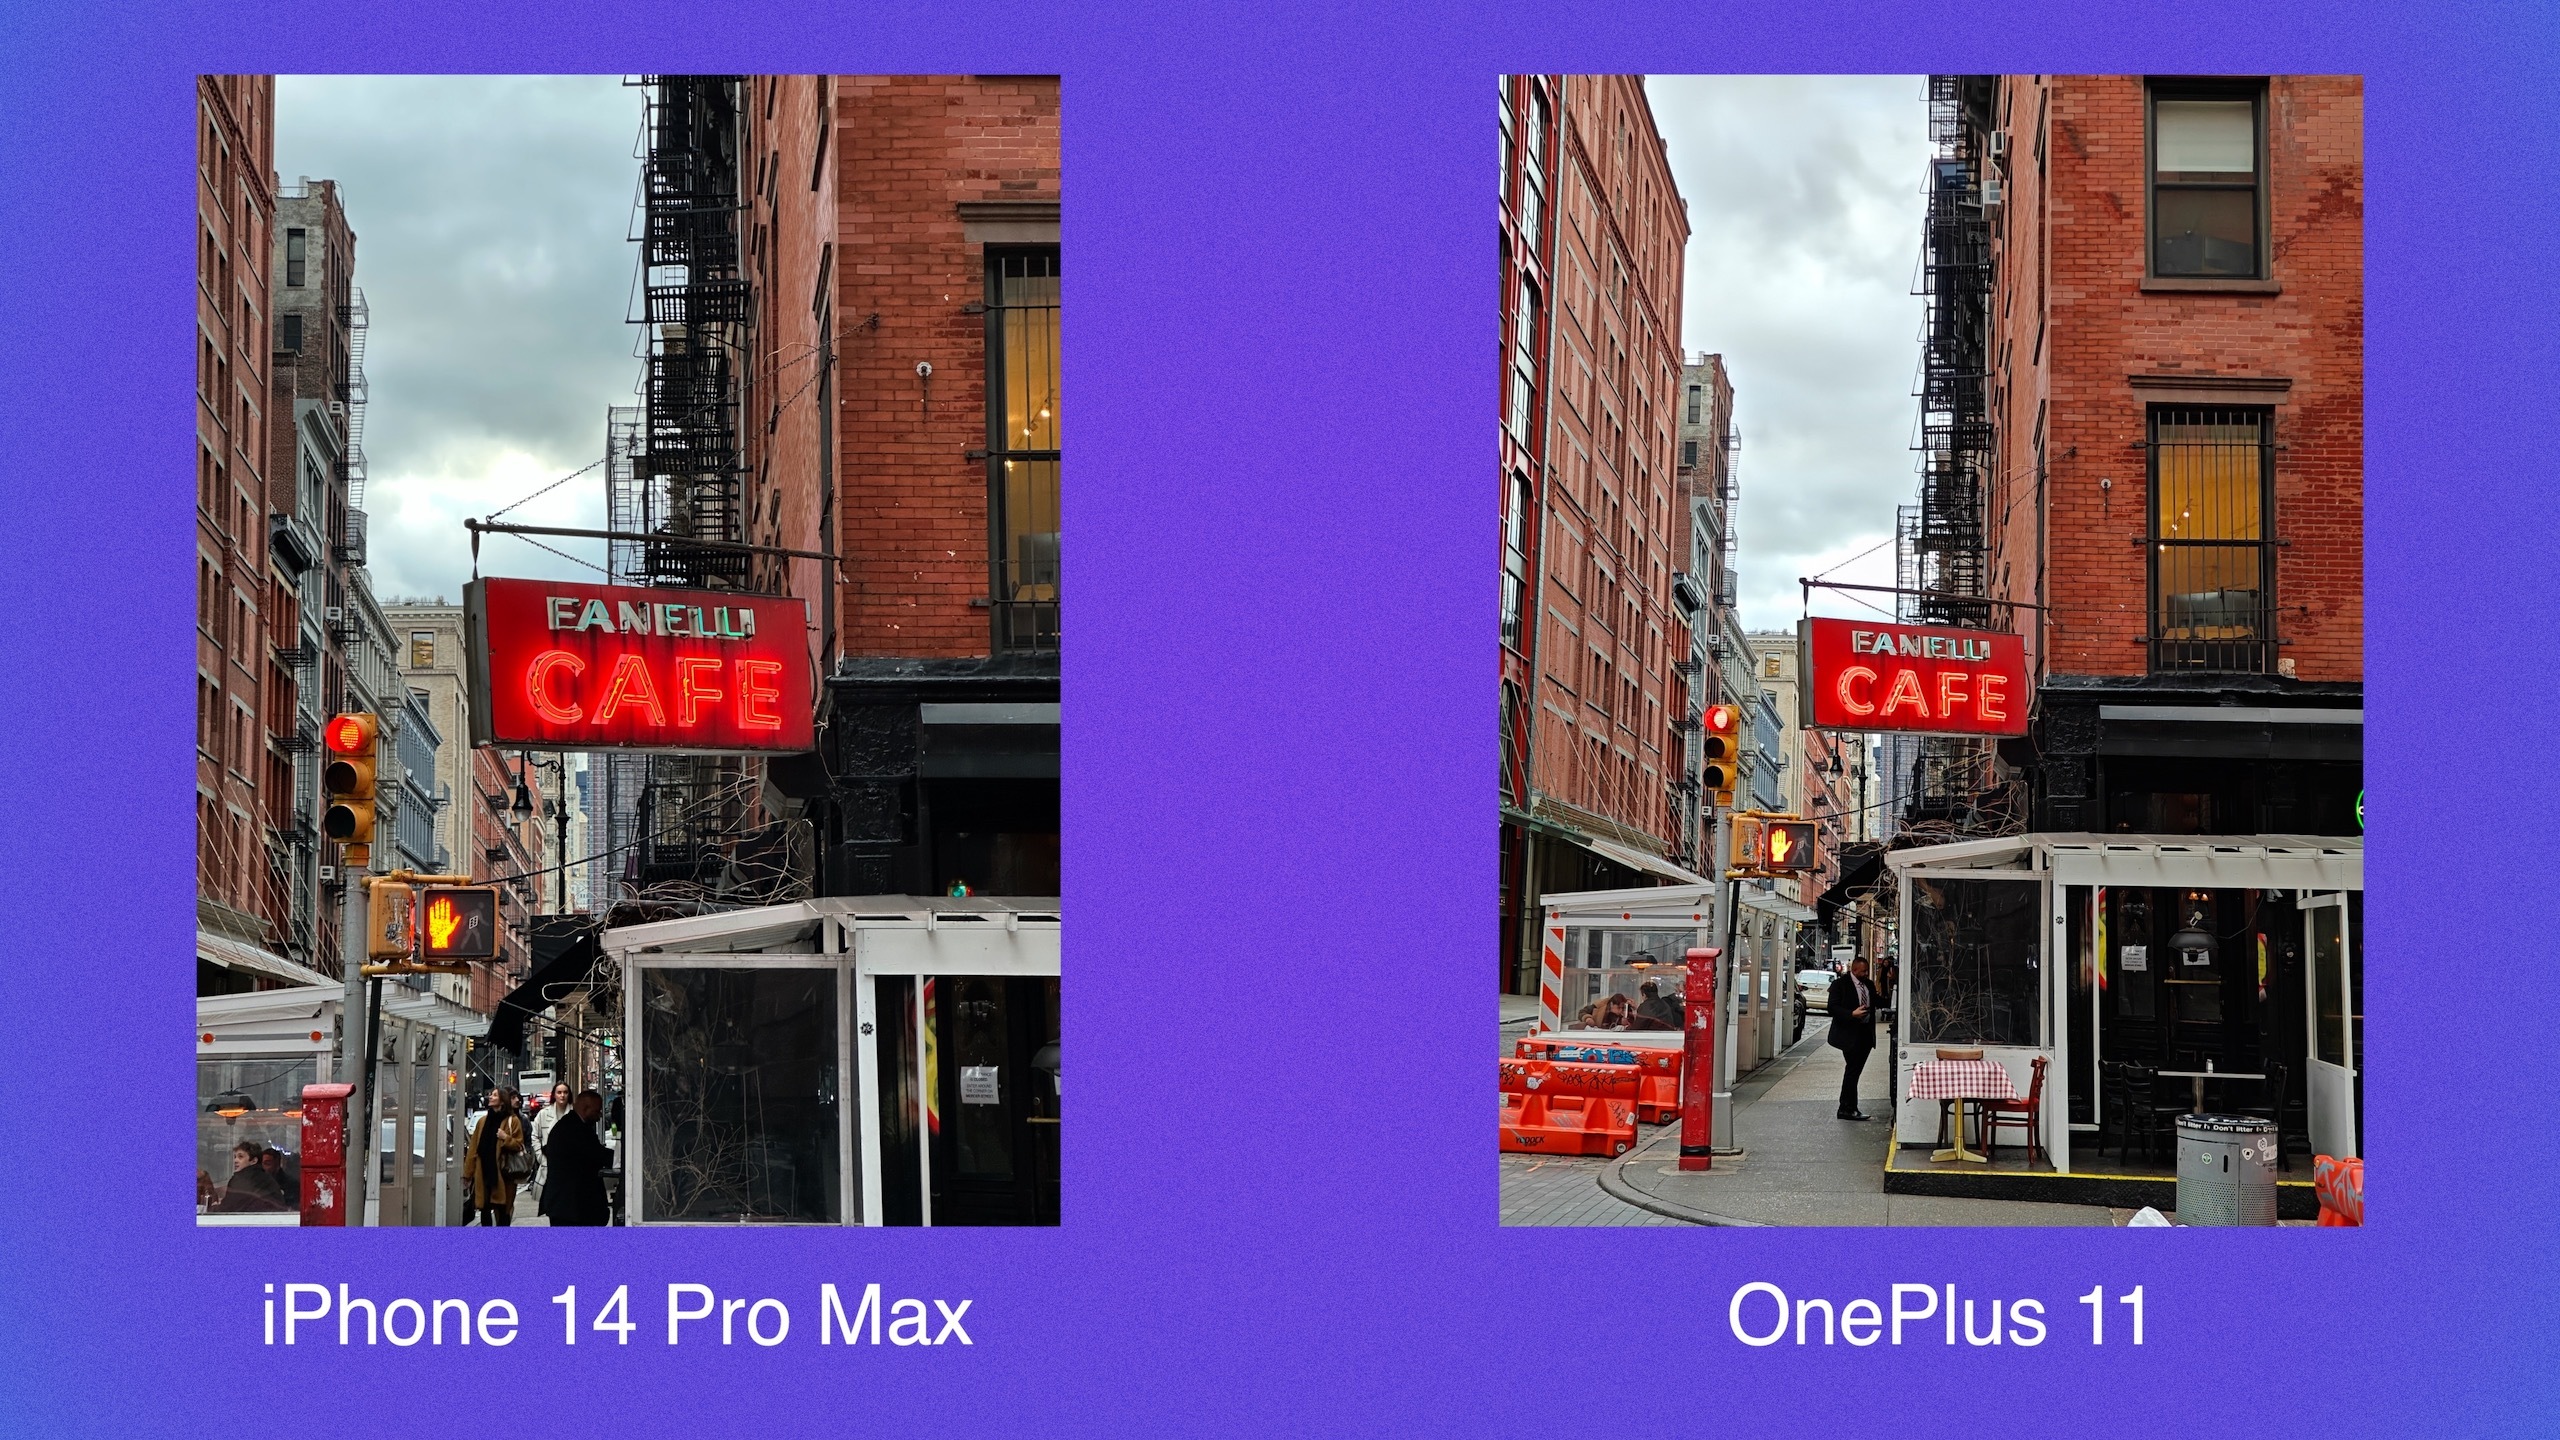 OnePlus 11 vs iPhone 14 Pro: Which is better?